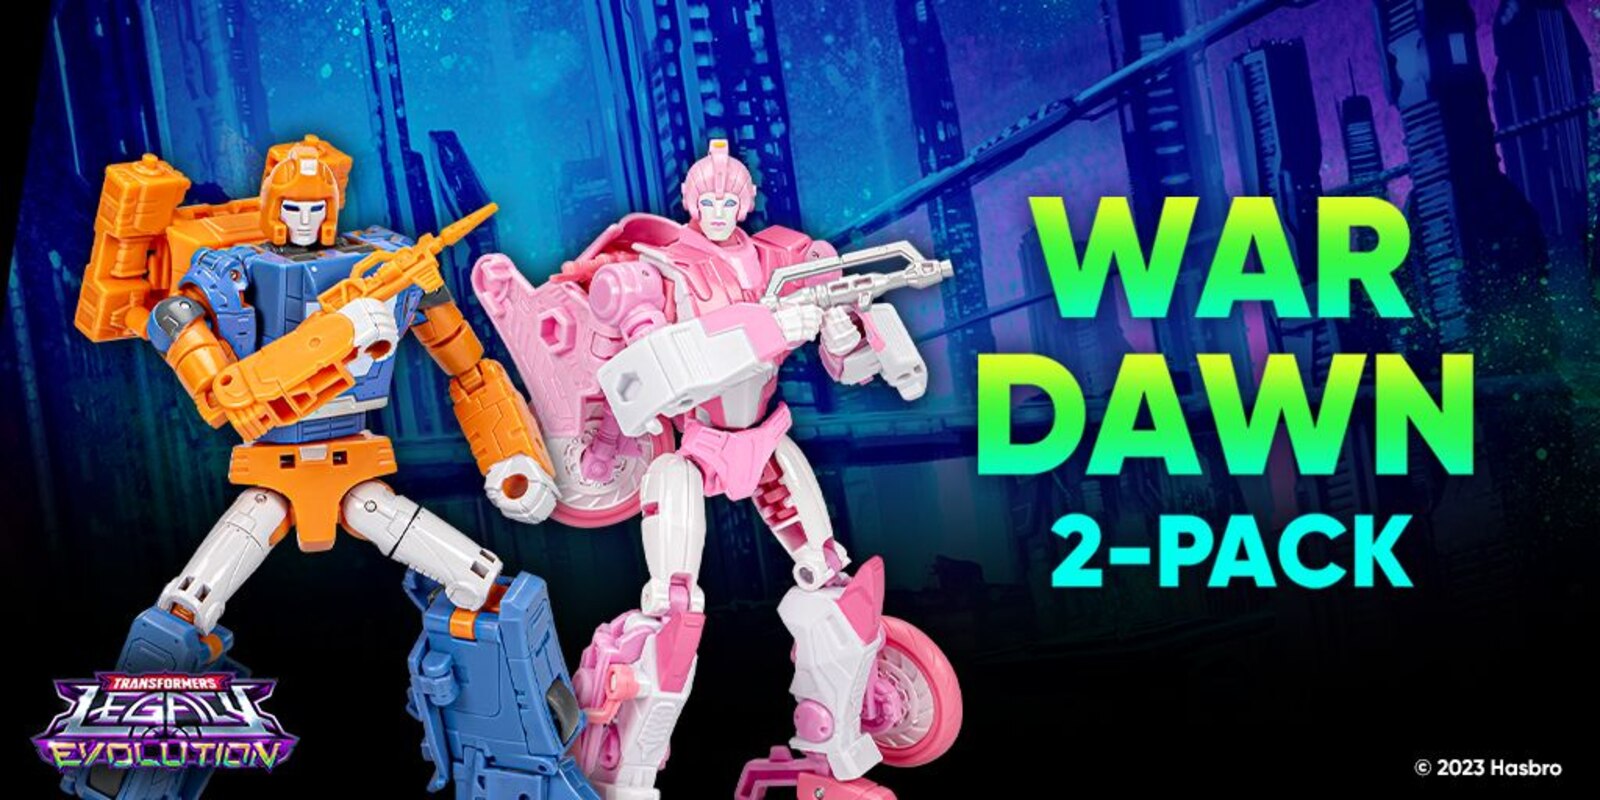 War Dawn 2-Pack SDCC Hasbro Pulse Exclusive Set Preorders Open Now!